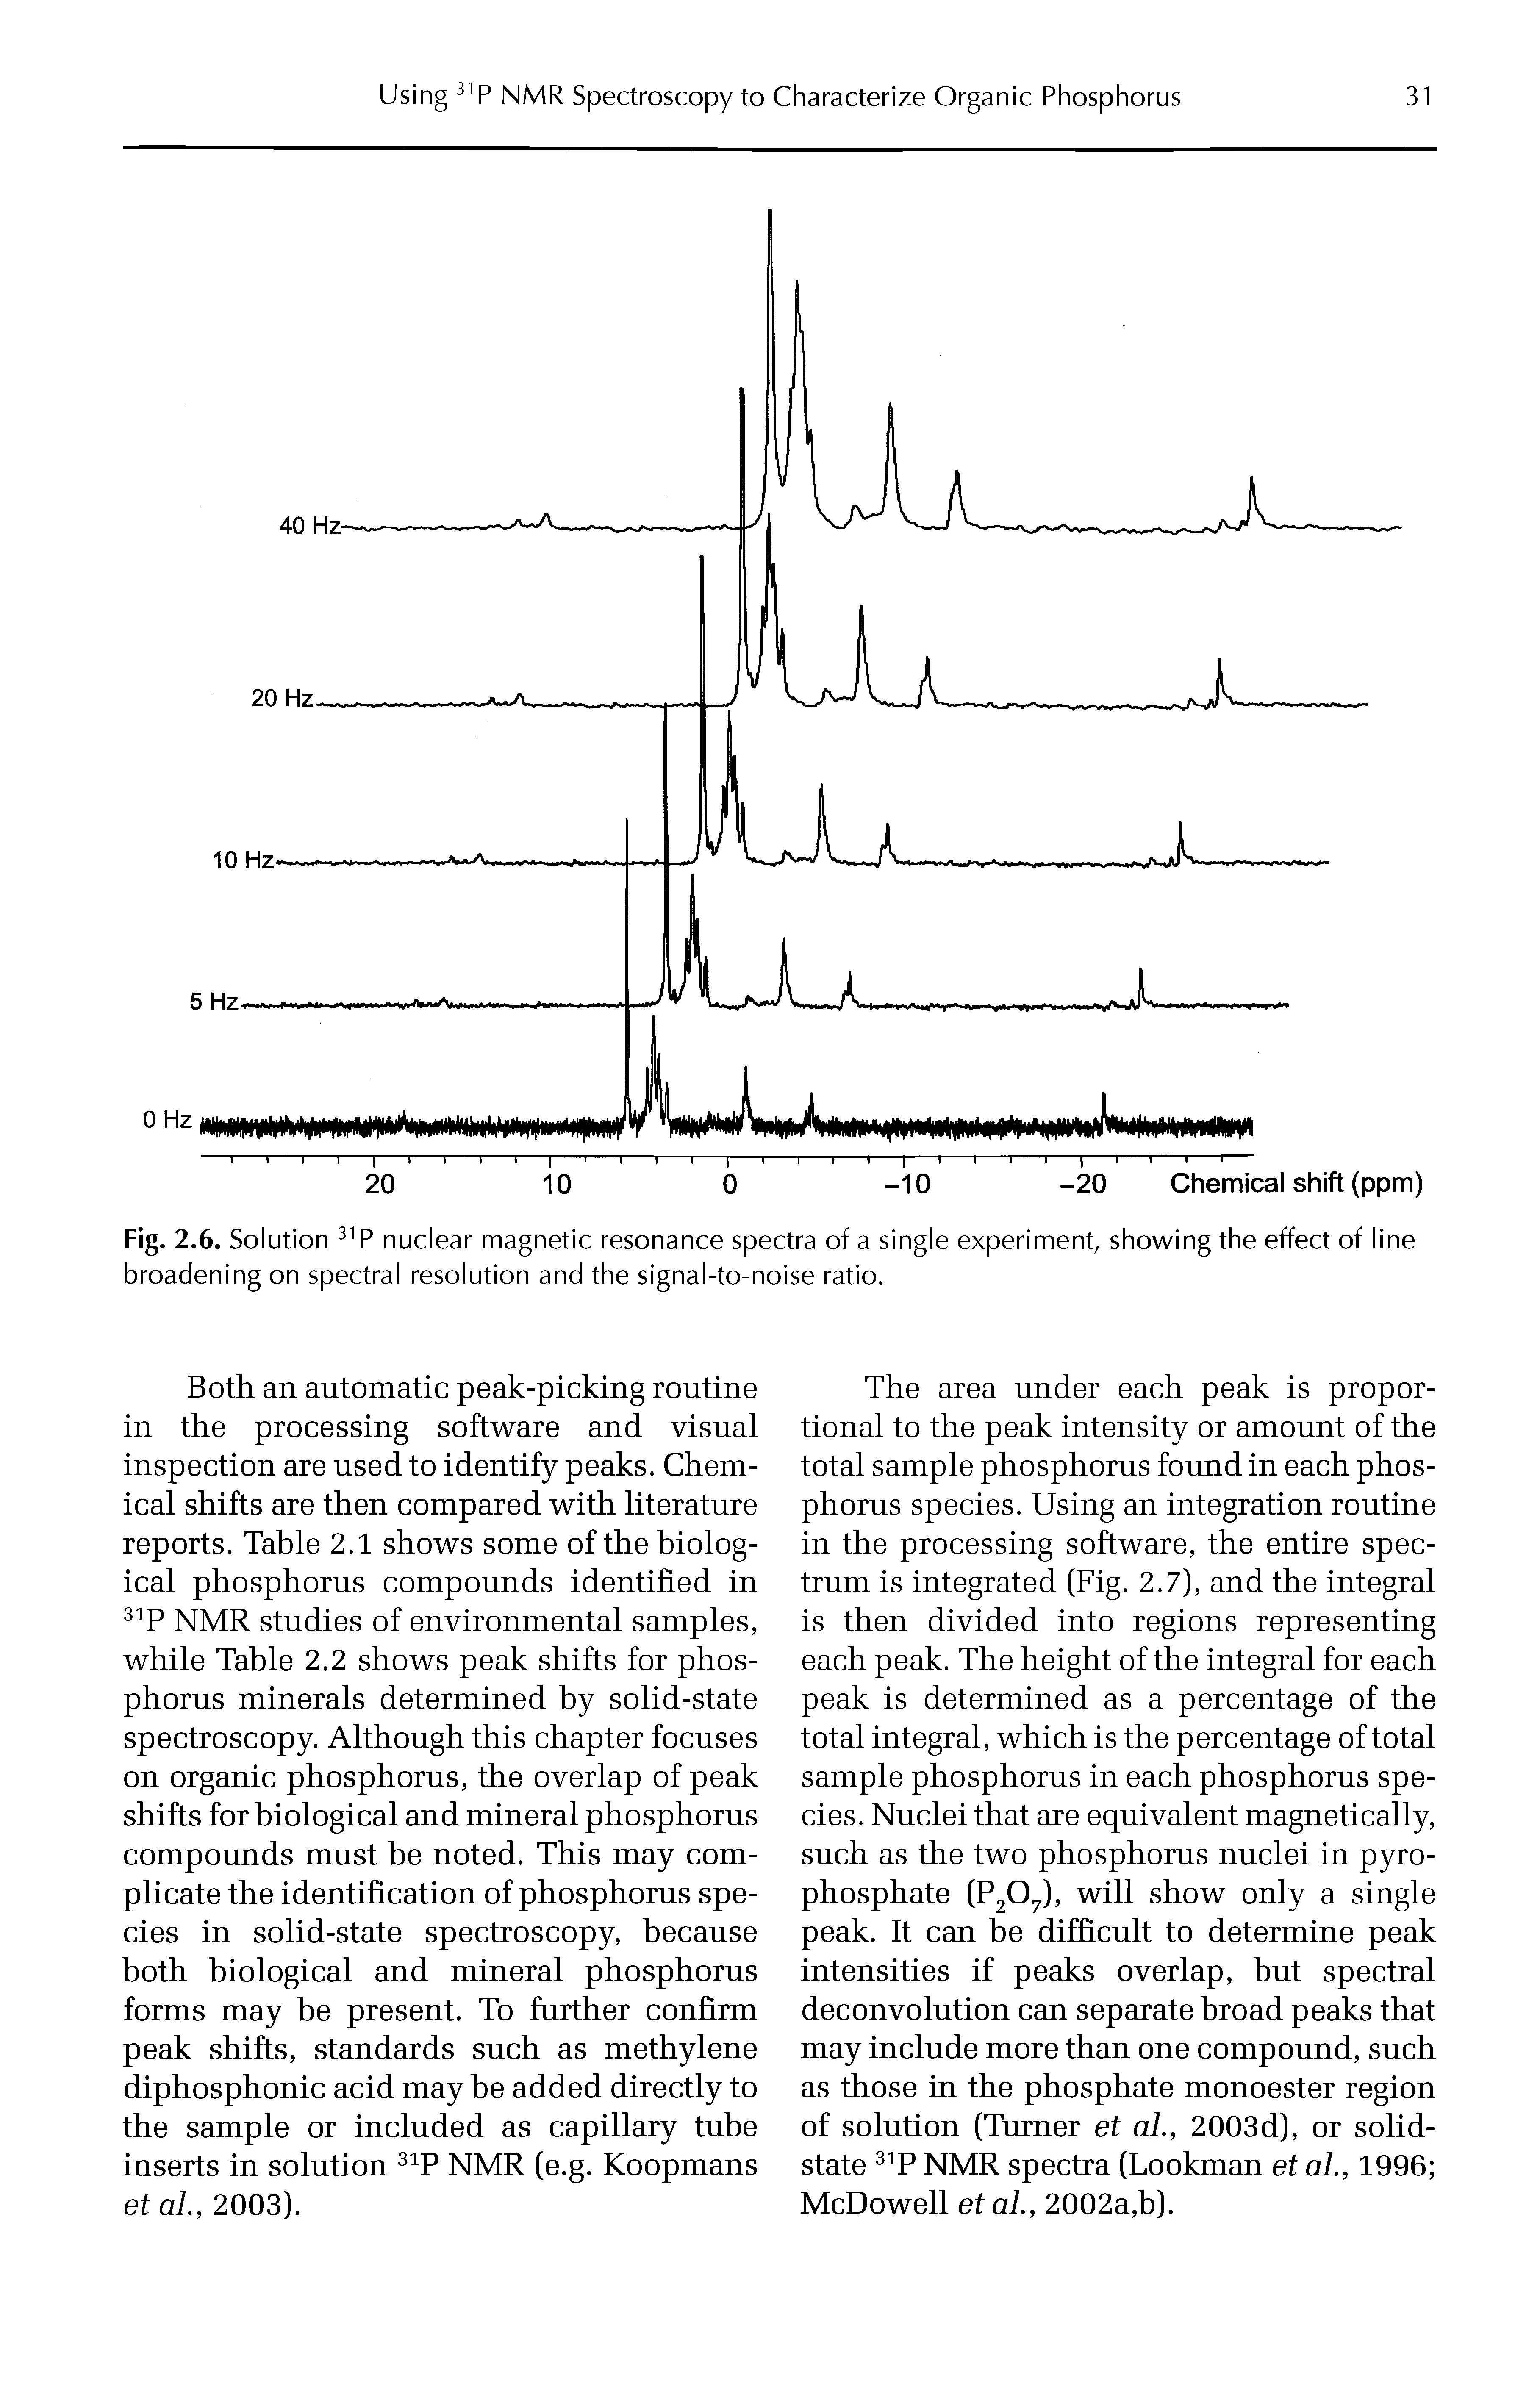 Fig. 2.6. Solution P nuclear magnetic resonance spectra of a single experiment, showing the effect of line broadening on spectral resolution and the signal-to-noise ratio.